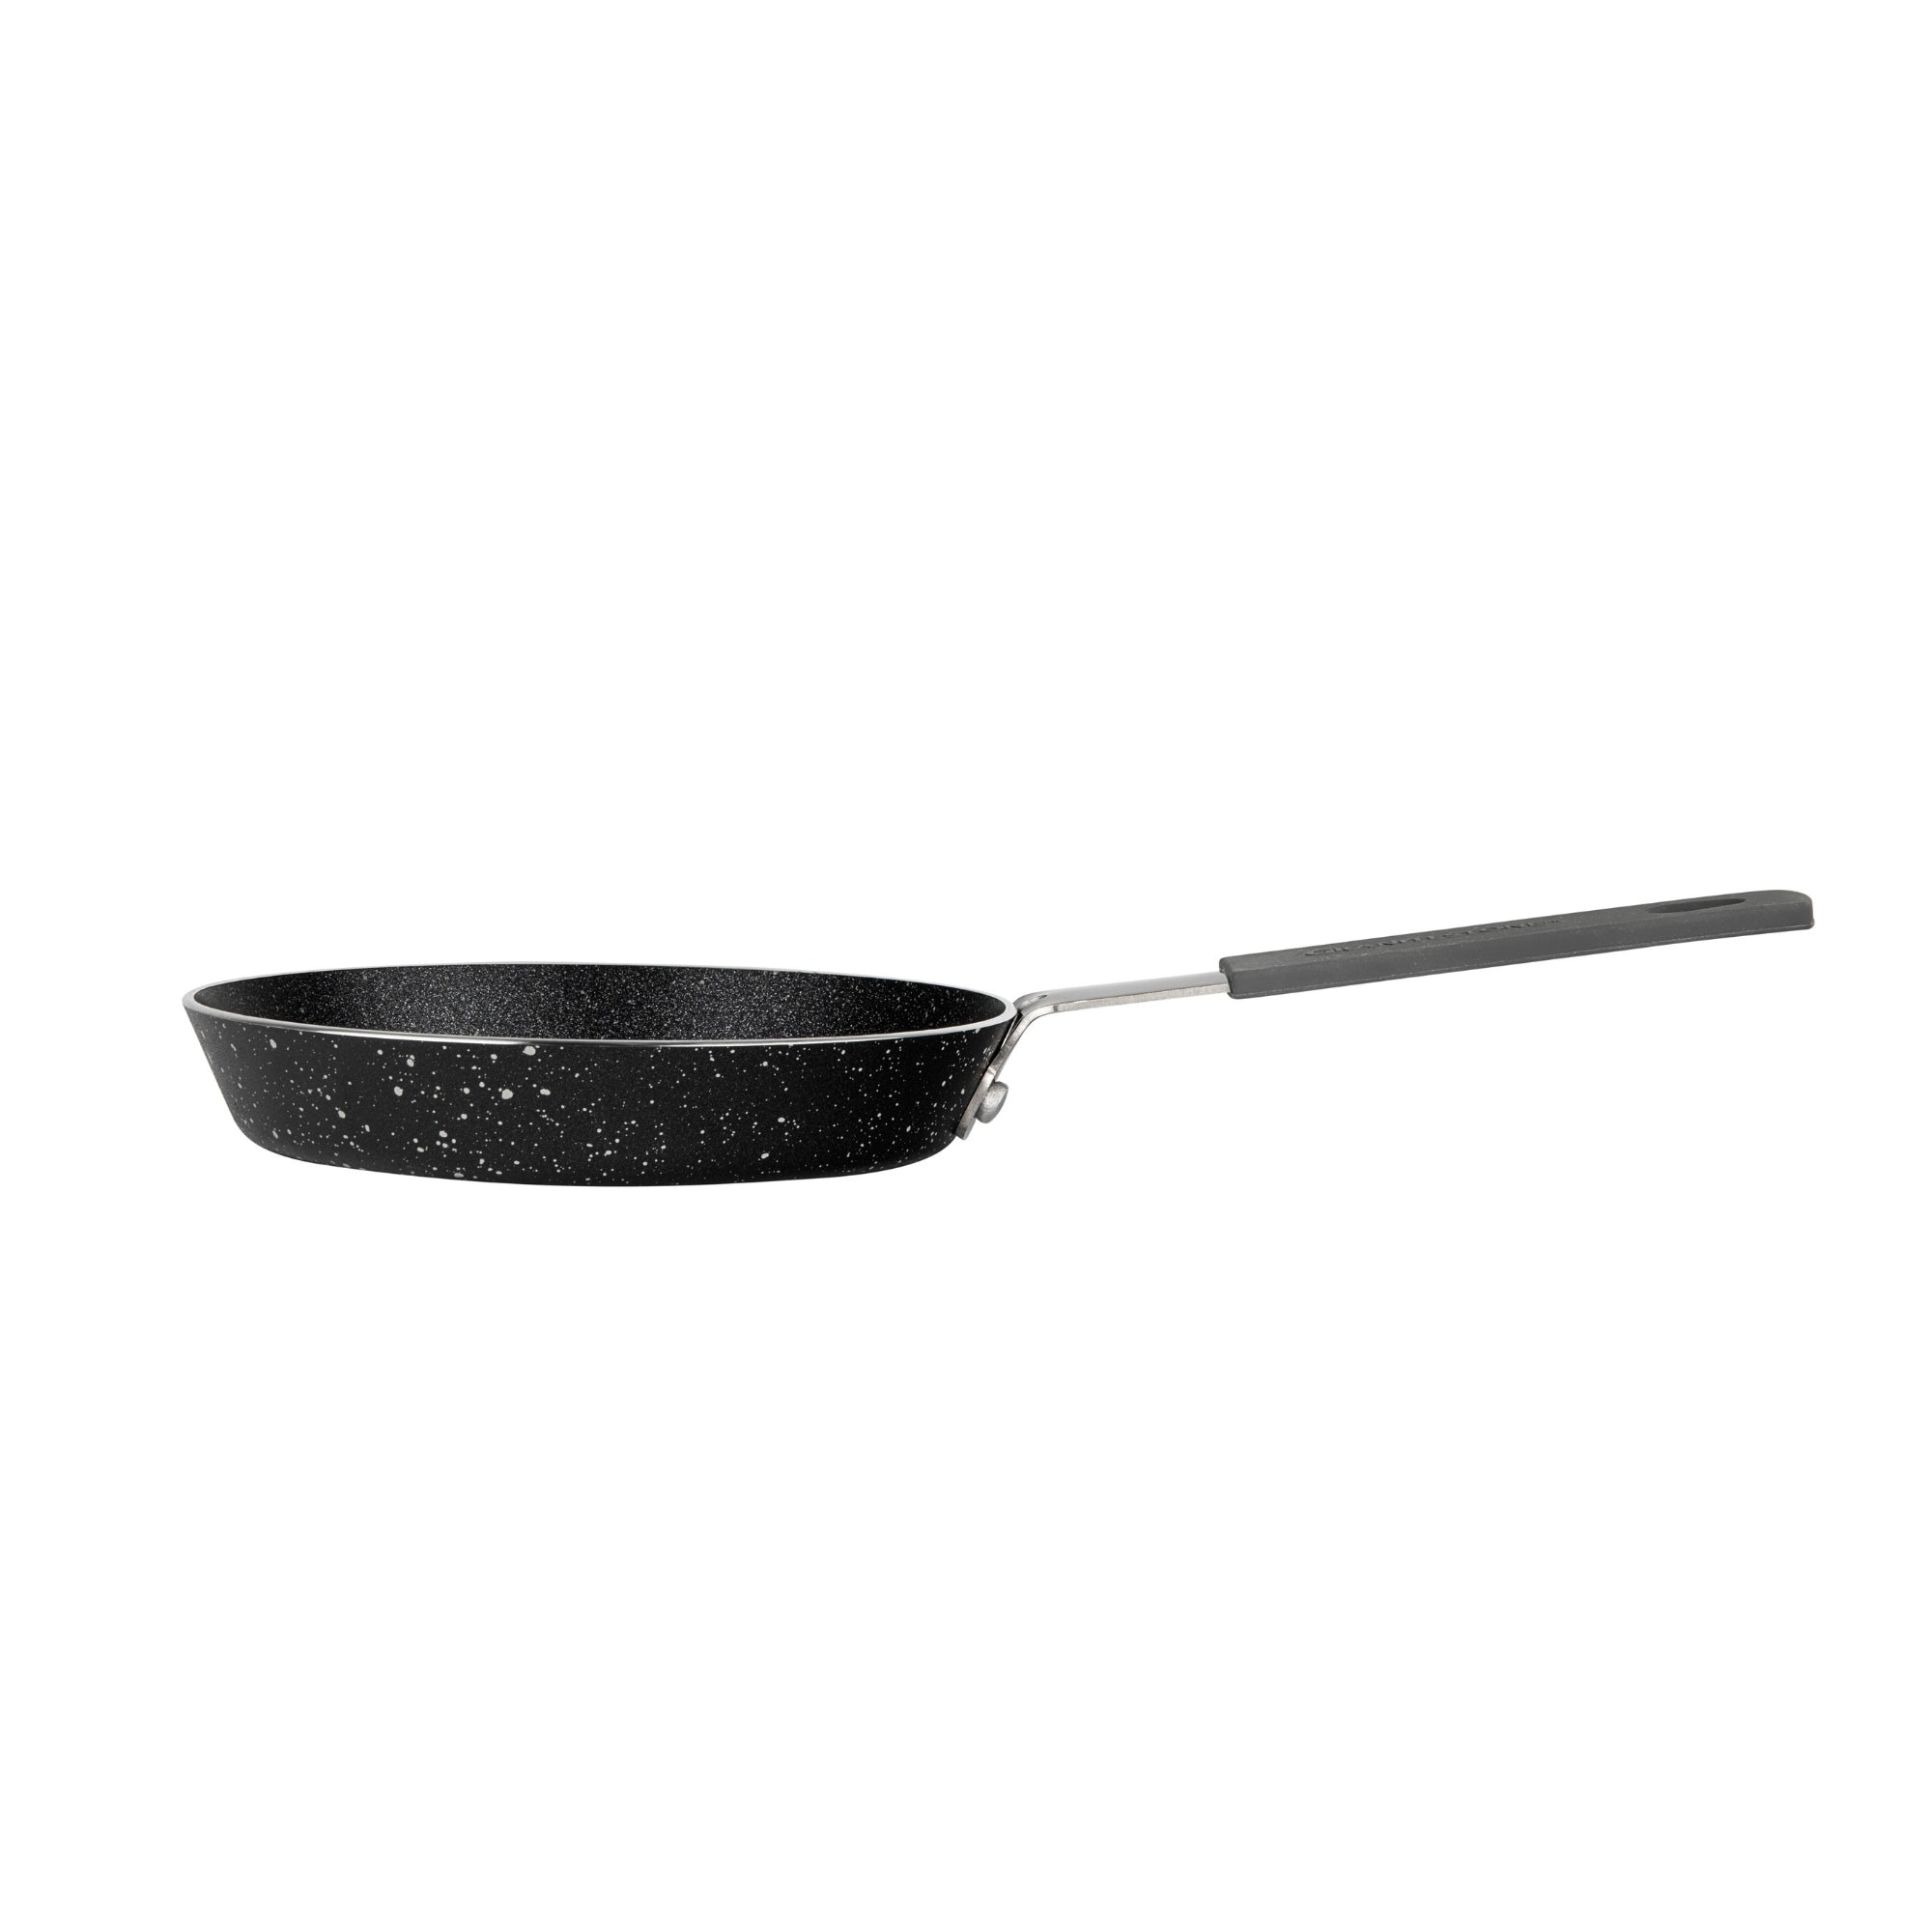 Granite Stone Blue 5.5 Single Egg Pan, Nonstick, Novelty-Sized Eggpan with  Rubber, Heat-Proof Handle, Dishwasher Safe 